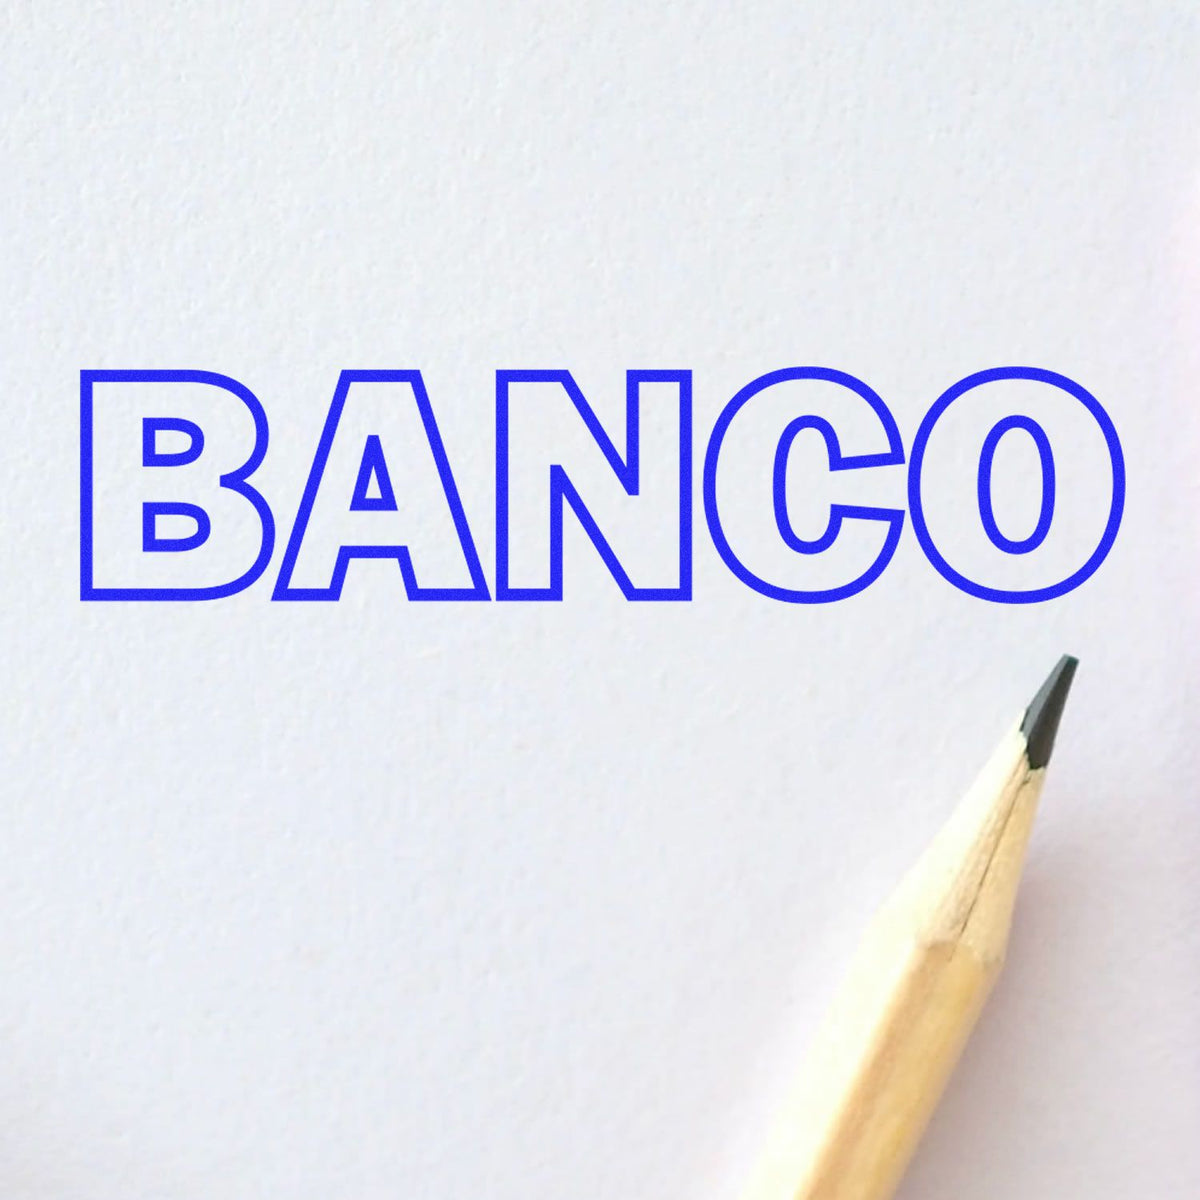 Self-Inking Banco Stamp In Use Photo